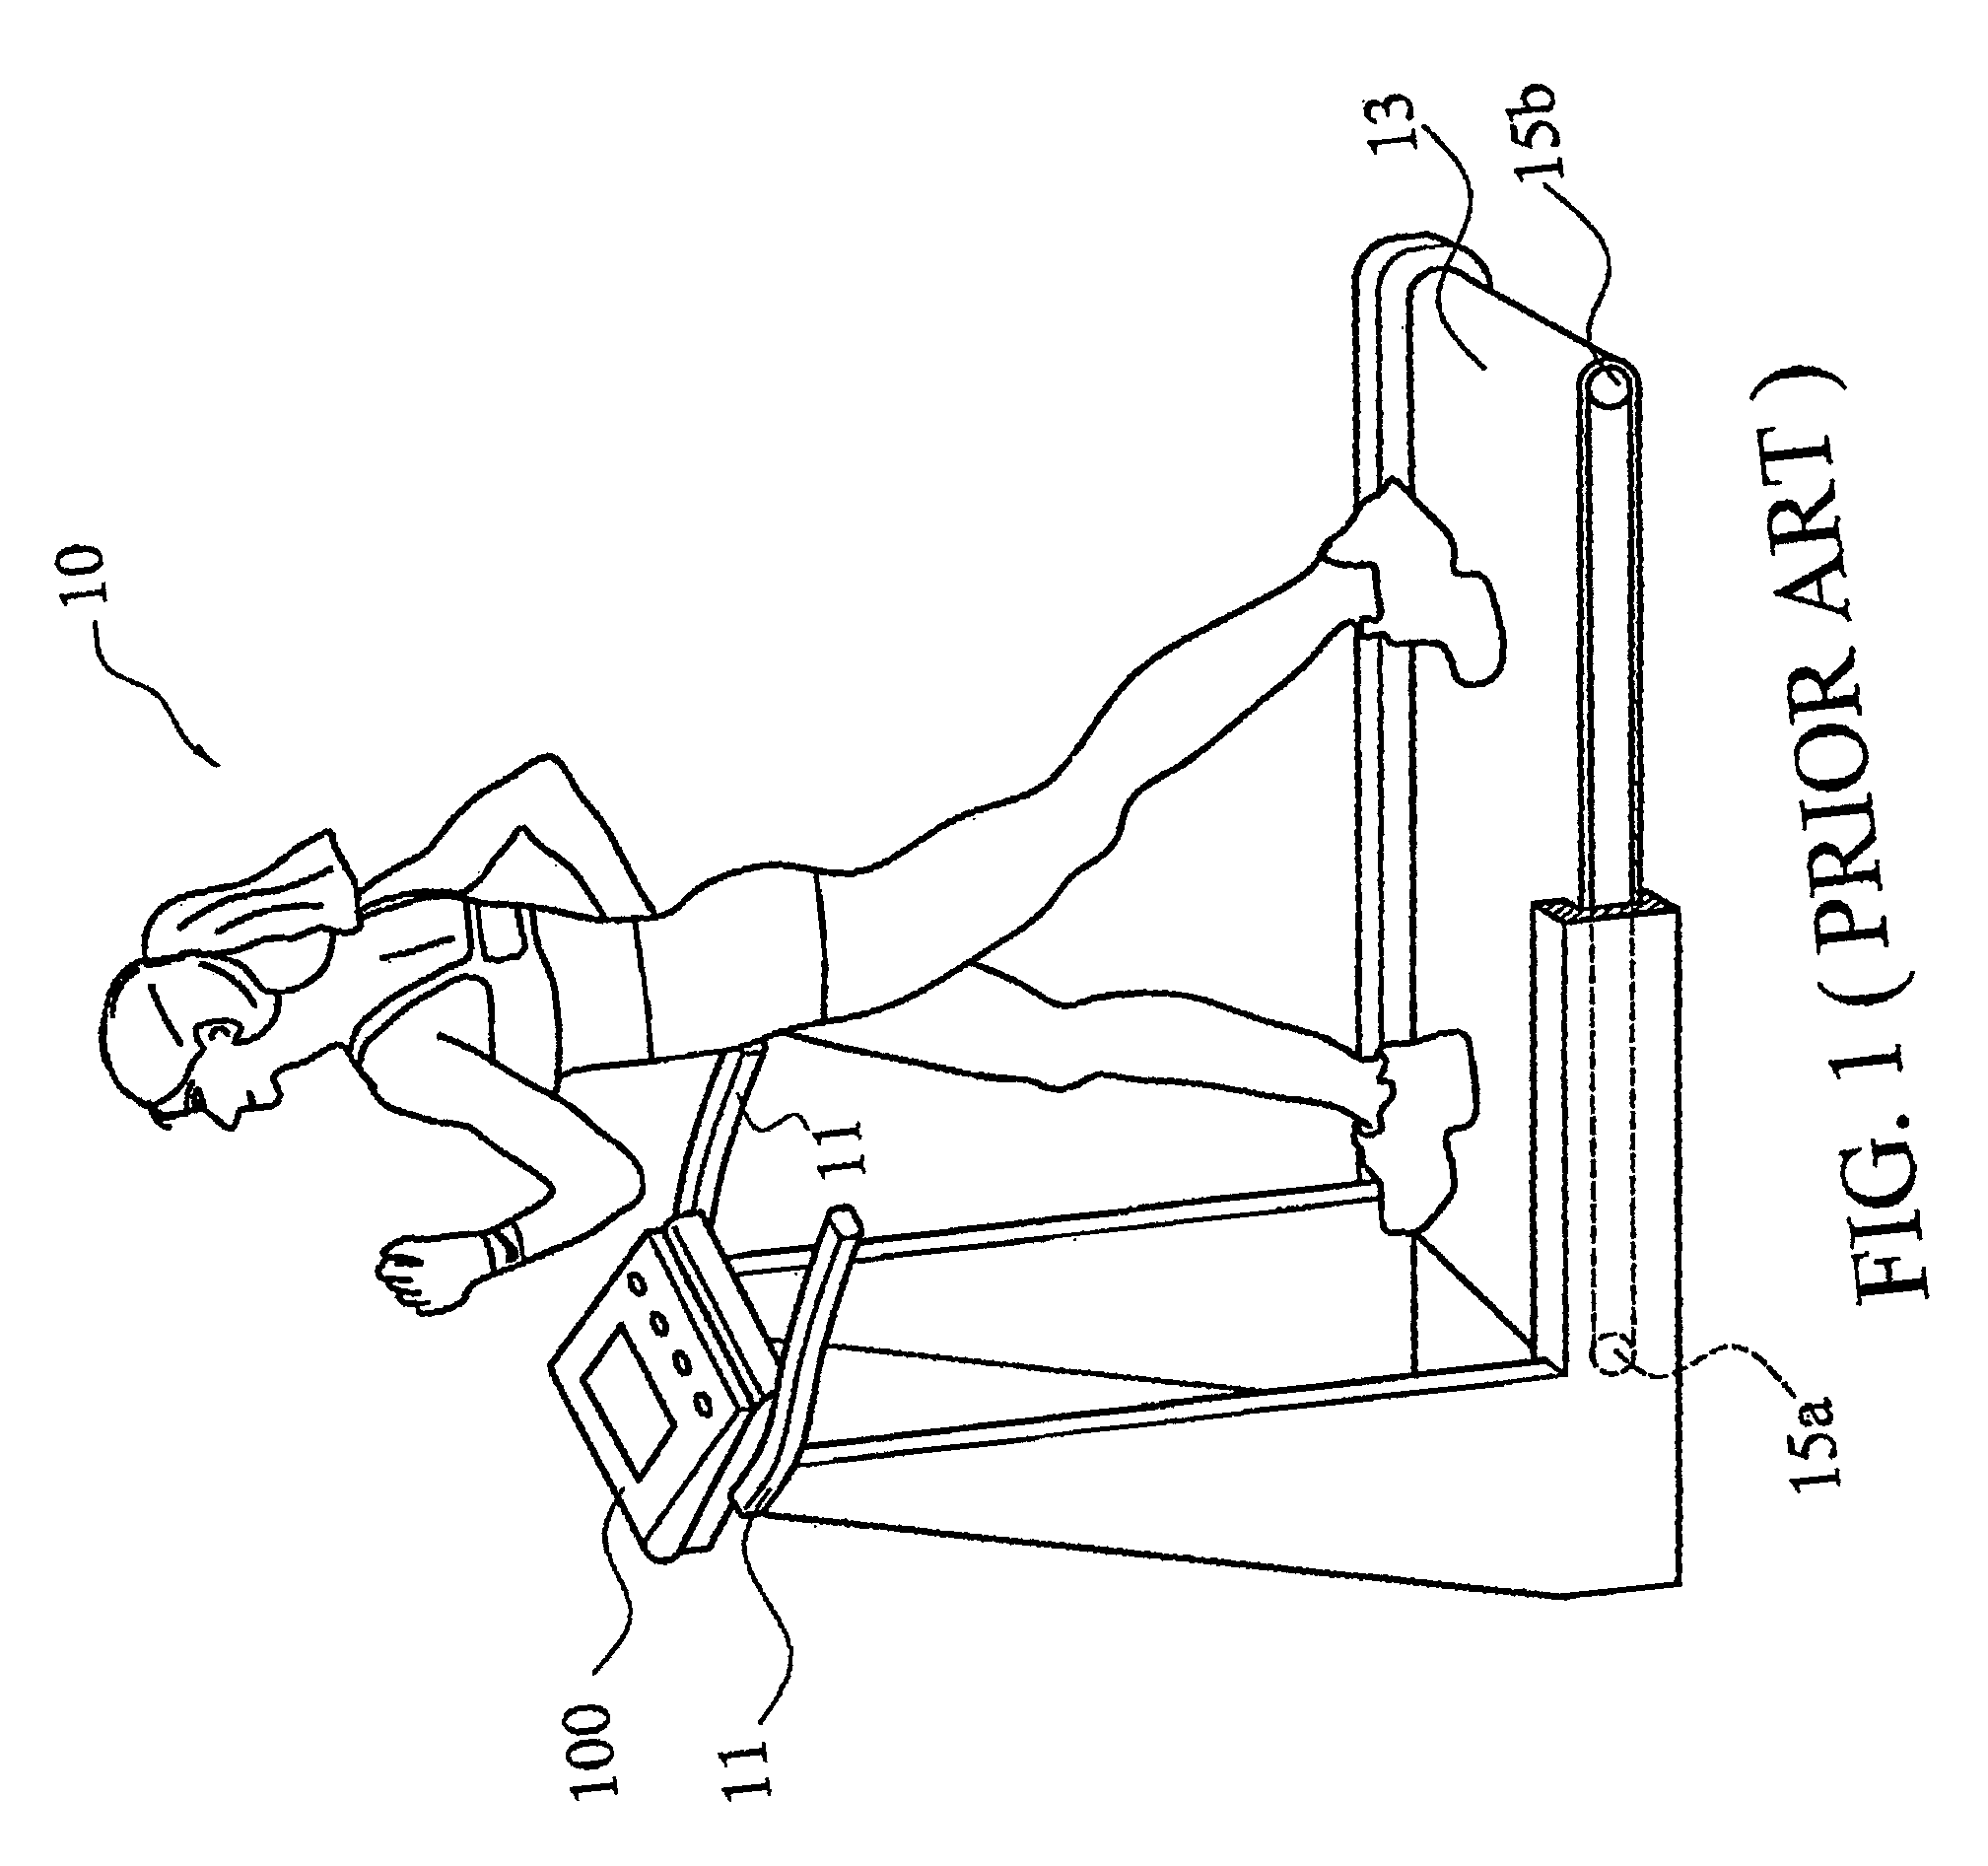 Exercise device